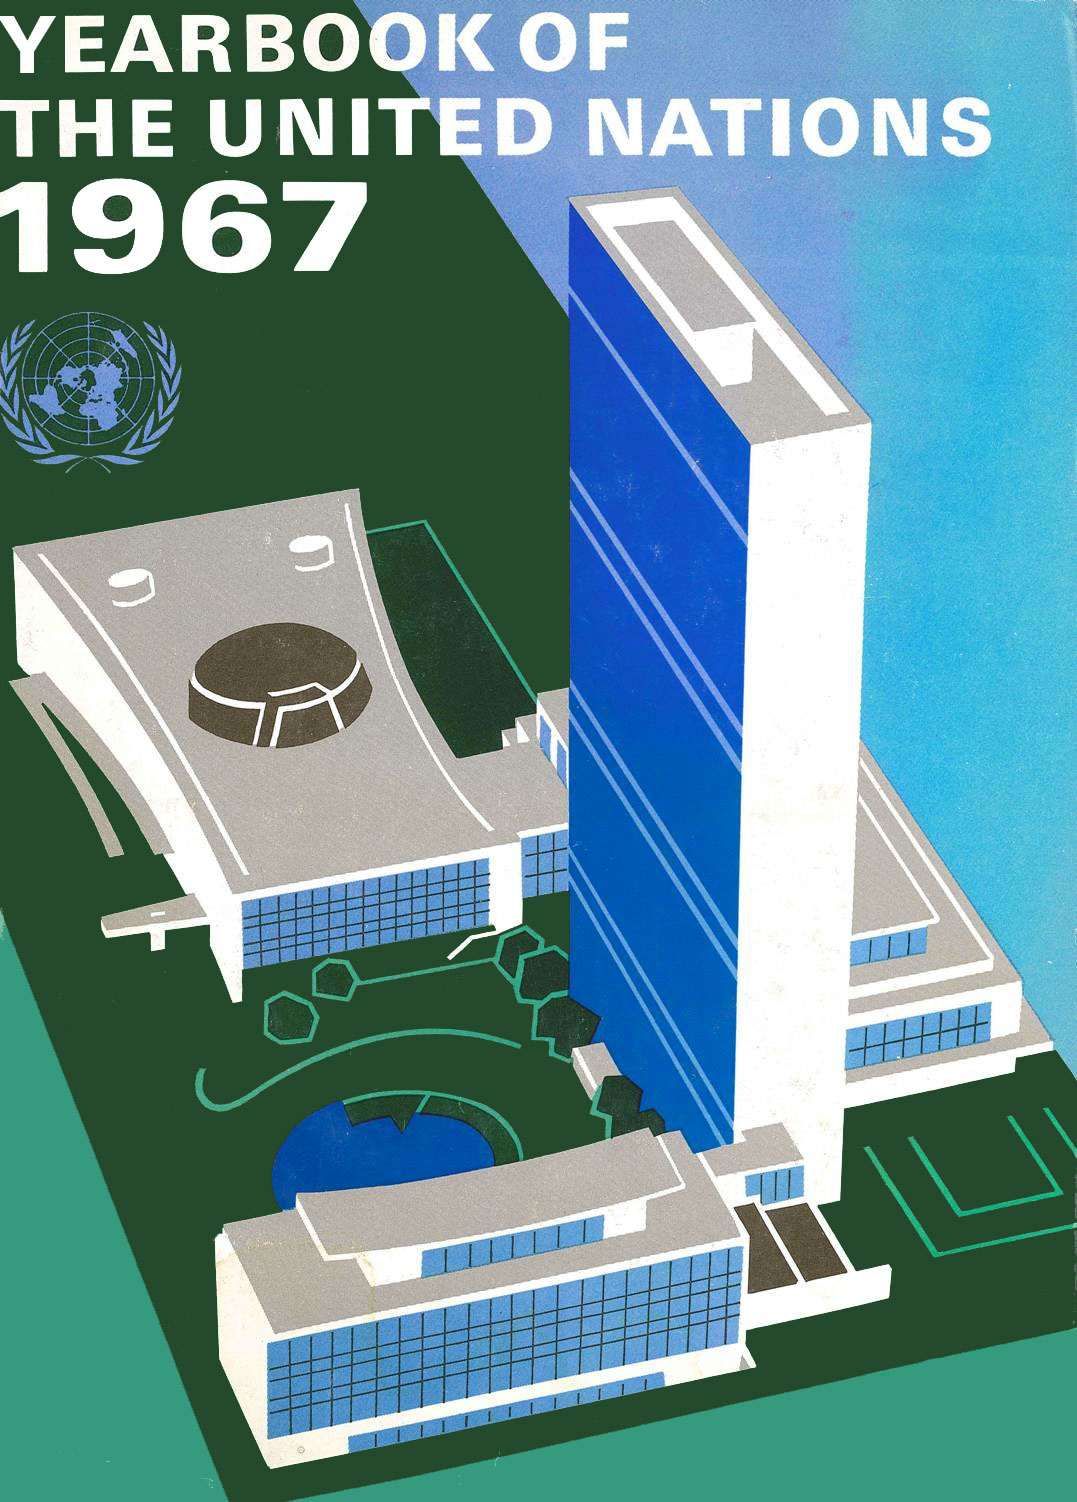 image of Yearbook of the United Nations 1967